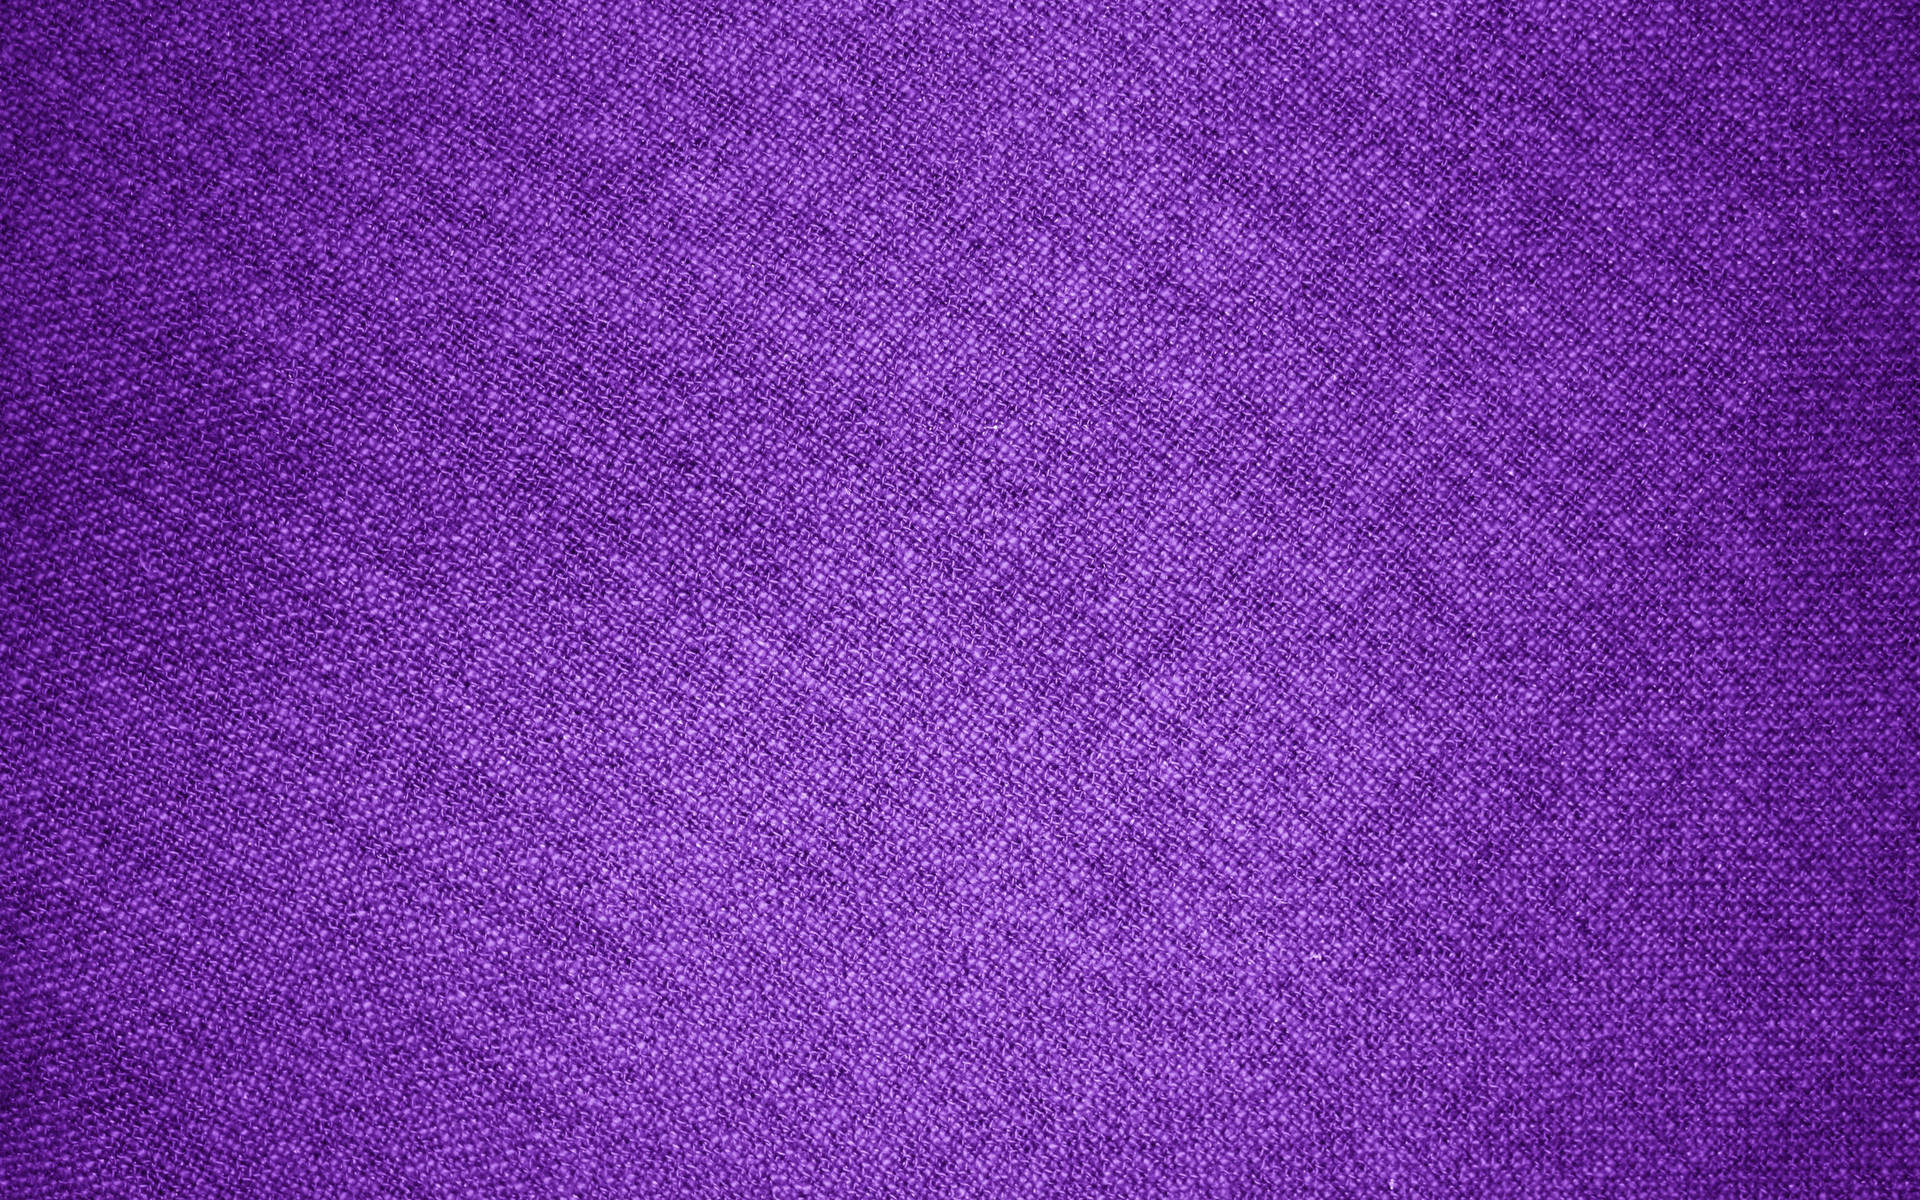 Violet Aesthetic Fabric Background